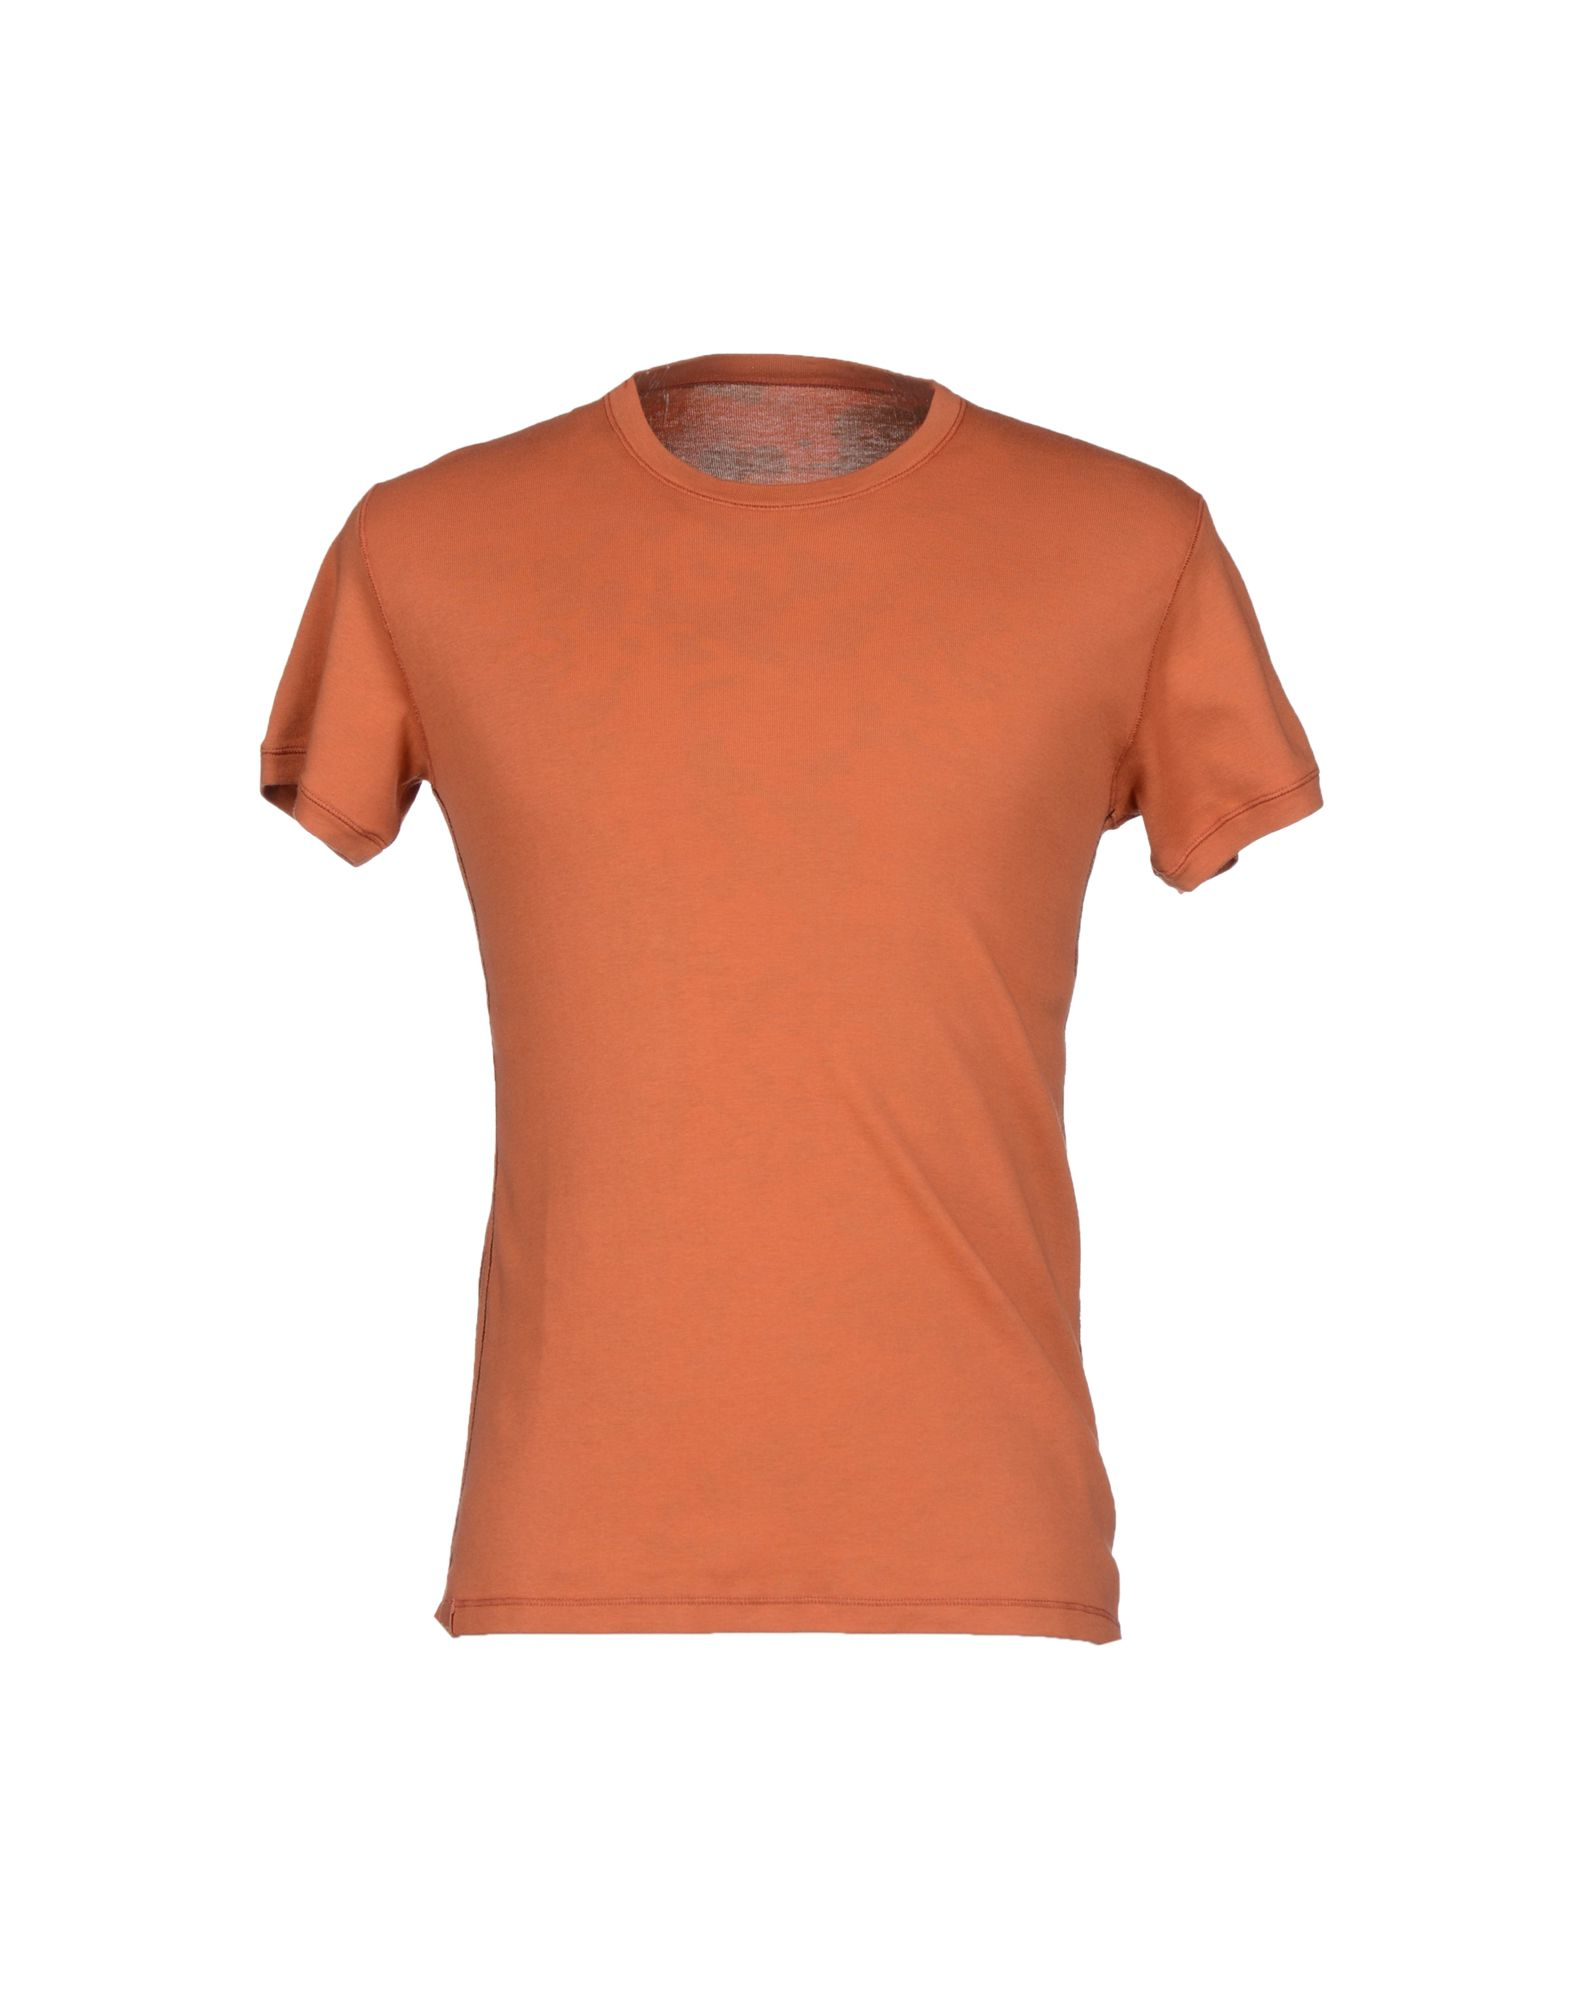 Care label T-shirt in Brown for Men (Rust) | Lyst